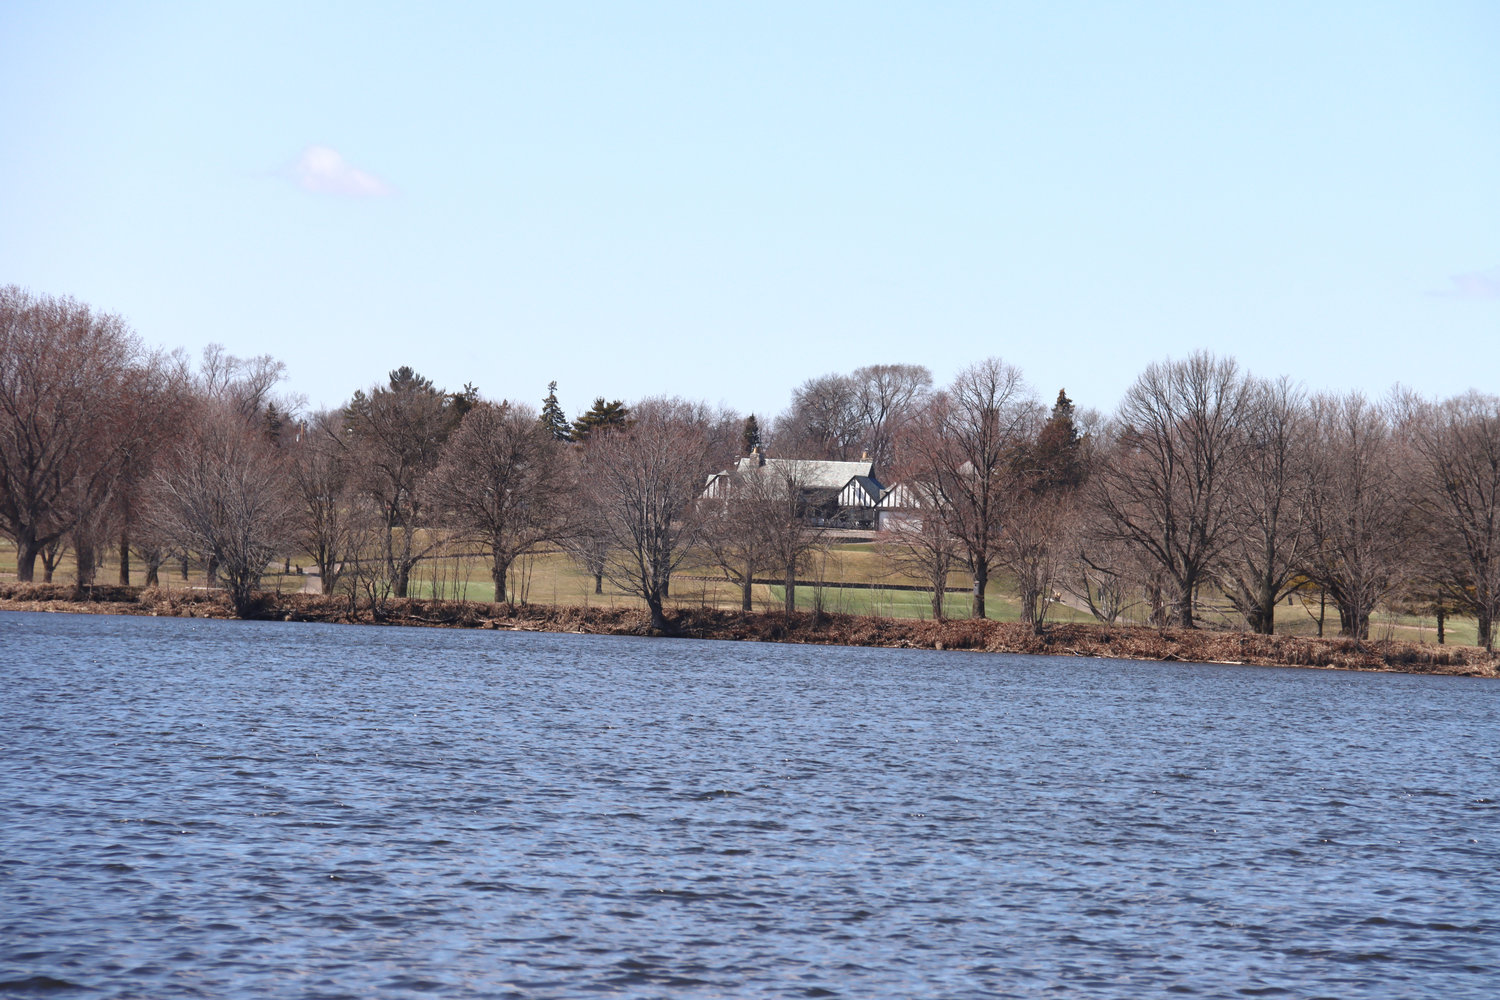 Lake Hiawatha with the golf course building in the background.